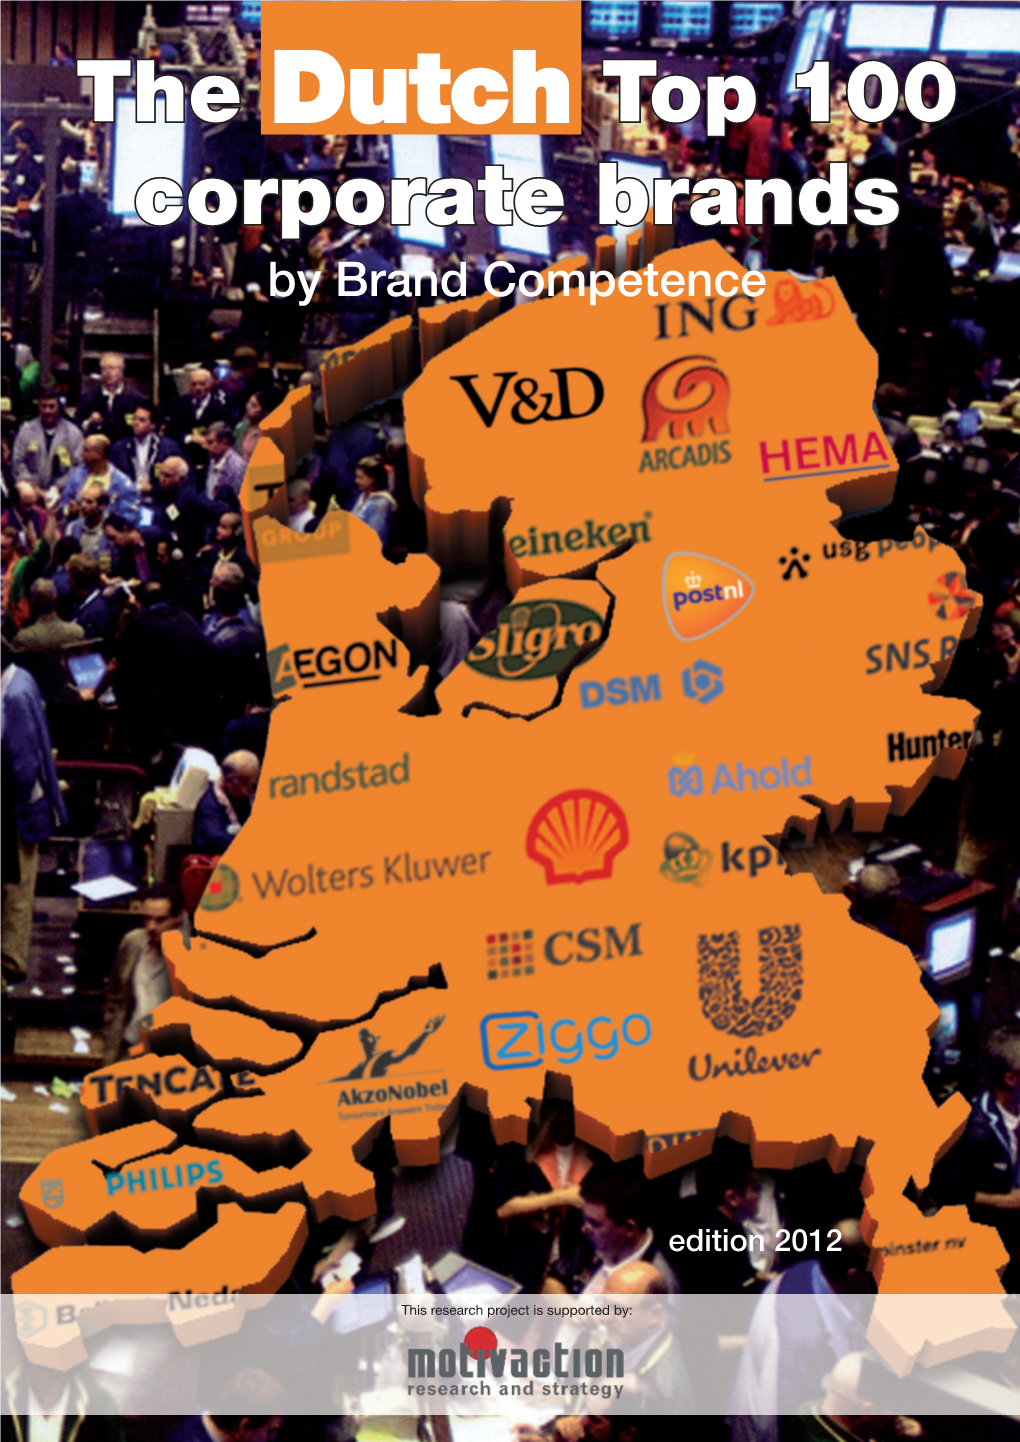 The Dutch Top 100 Corporate Brands by Brand Competence